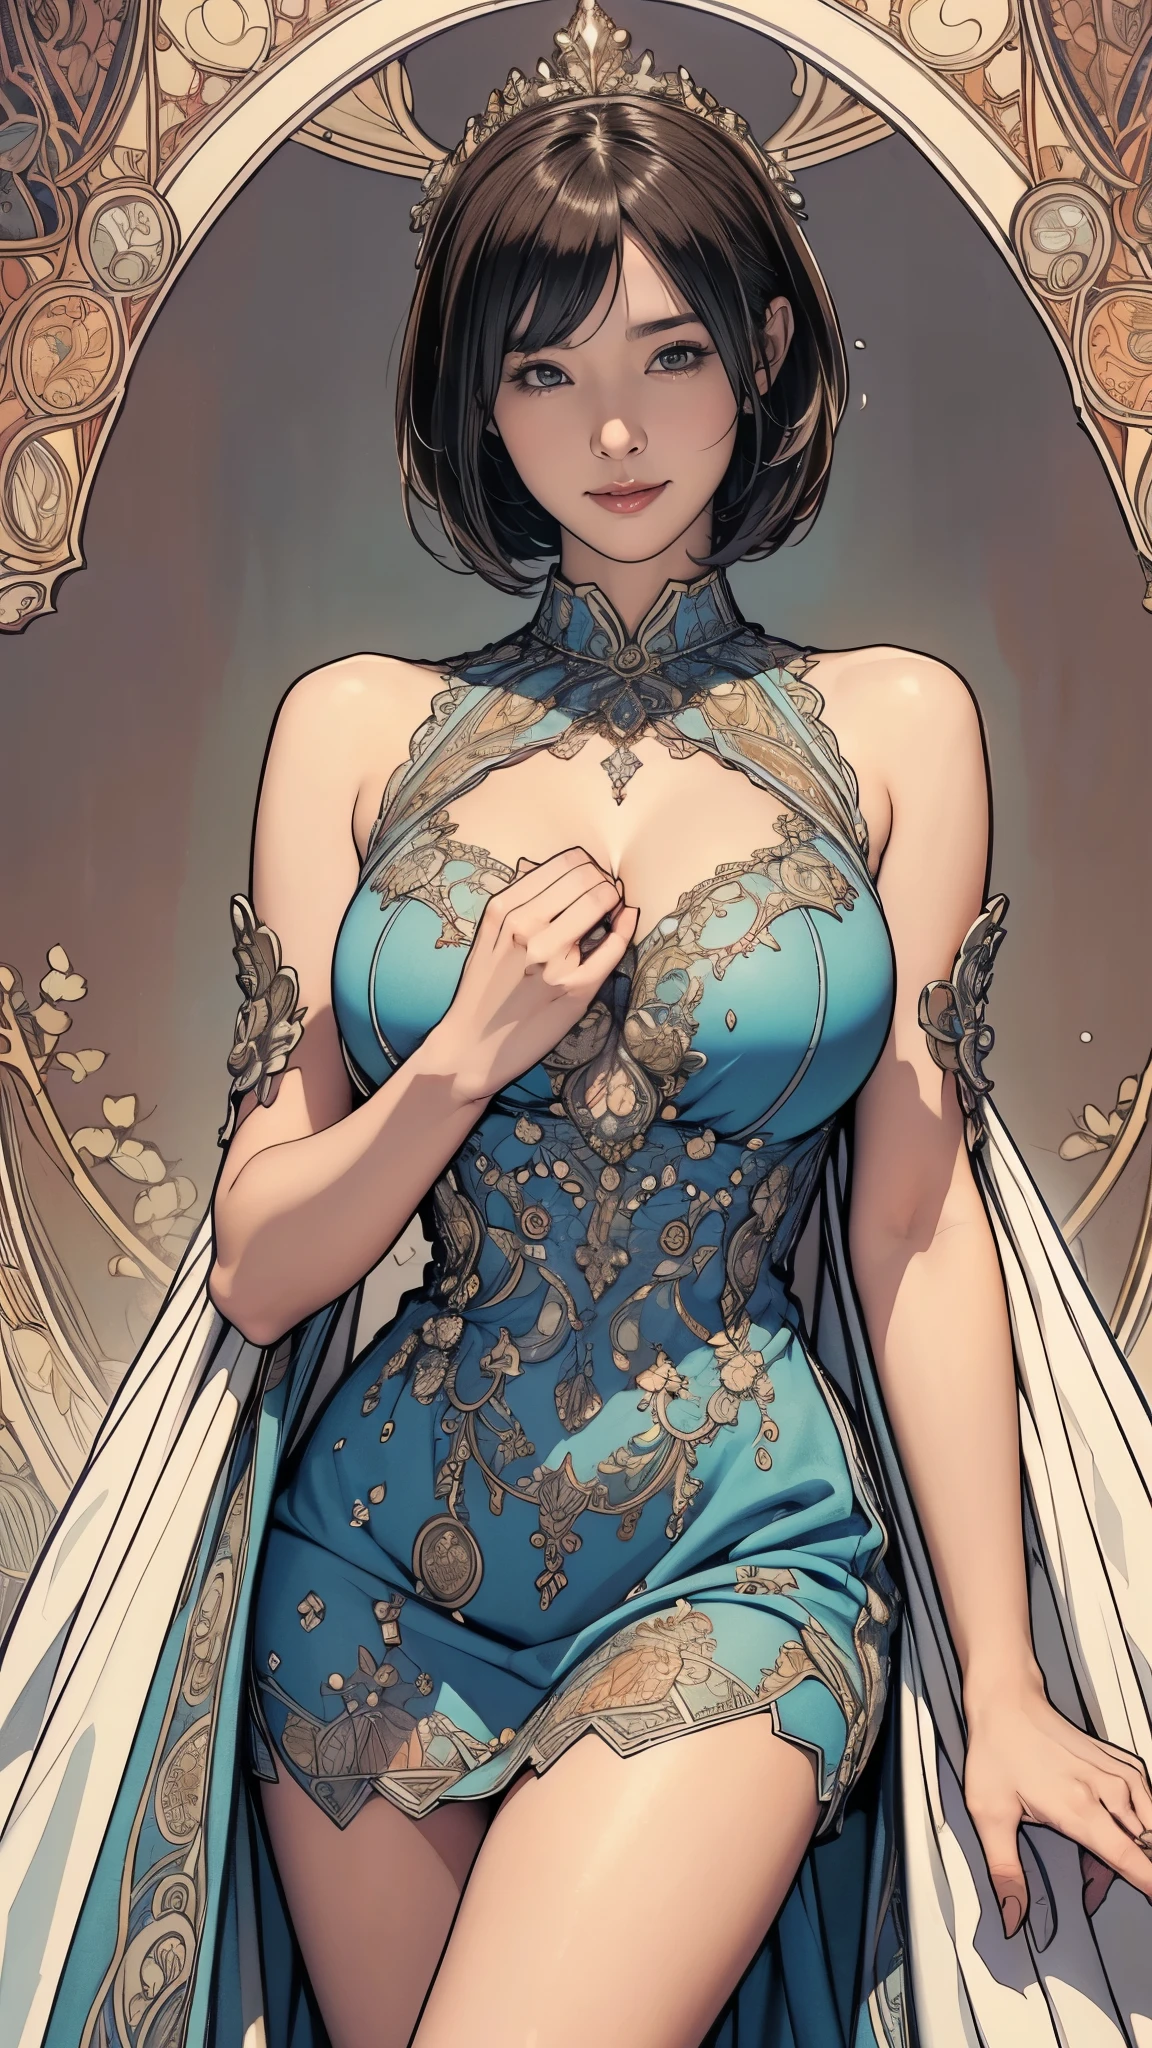 (masterpiece),(highest quality),(Very detailed),(High resolution),8k,wallpaper,soft-edged,1 girl,The goddess of sexuality is praying,Short Bob,Big Breasts,front,Looking at me,Sexy smile,((Vulgar dresses:1.5)),Intricate Mucha-inspired designs and patterns